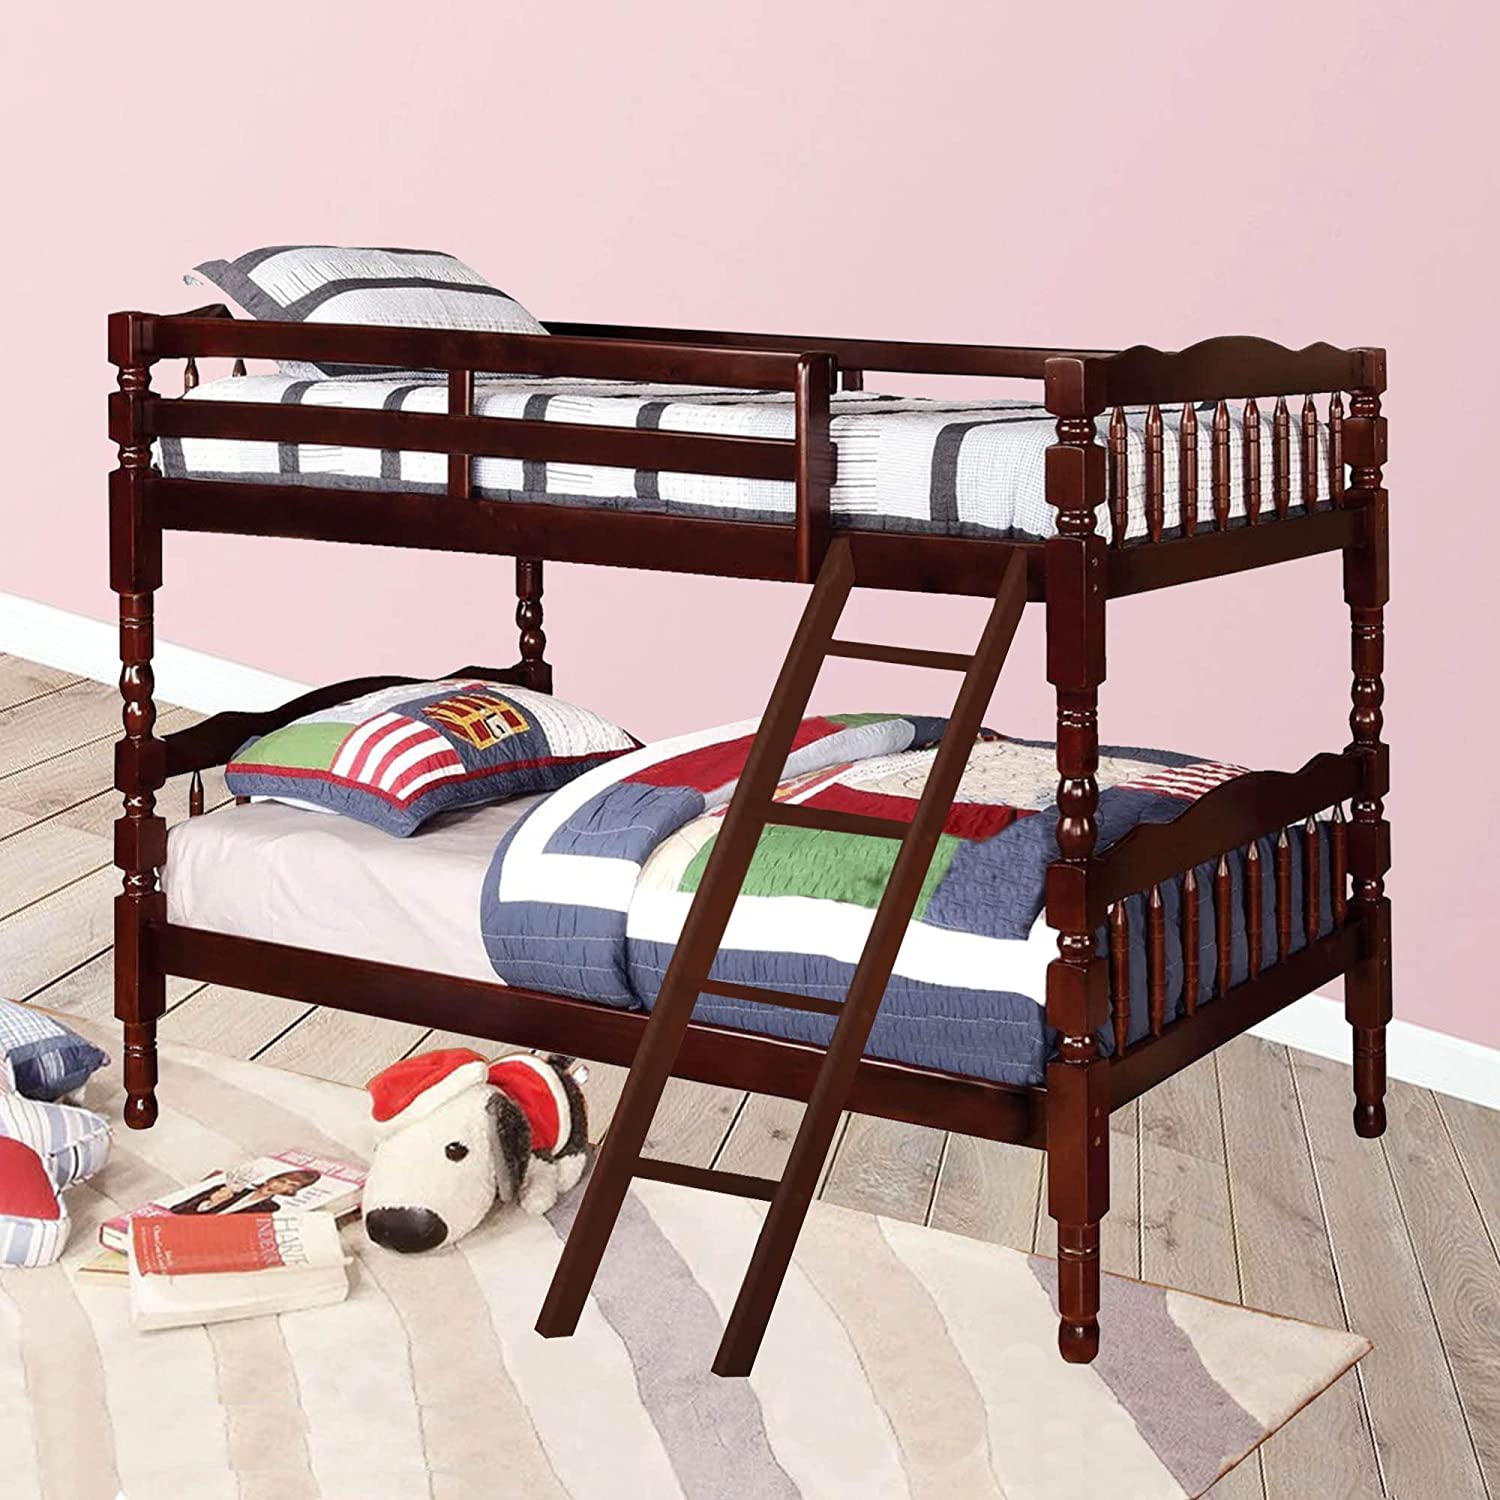 Better Home Products Charlotte Twin Over Twin Solid Wood Bunk Bed in Tobacco